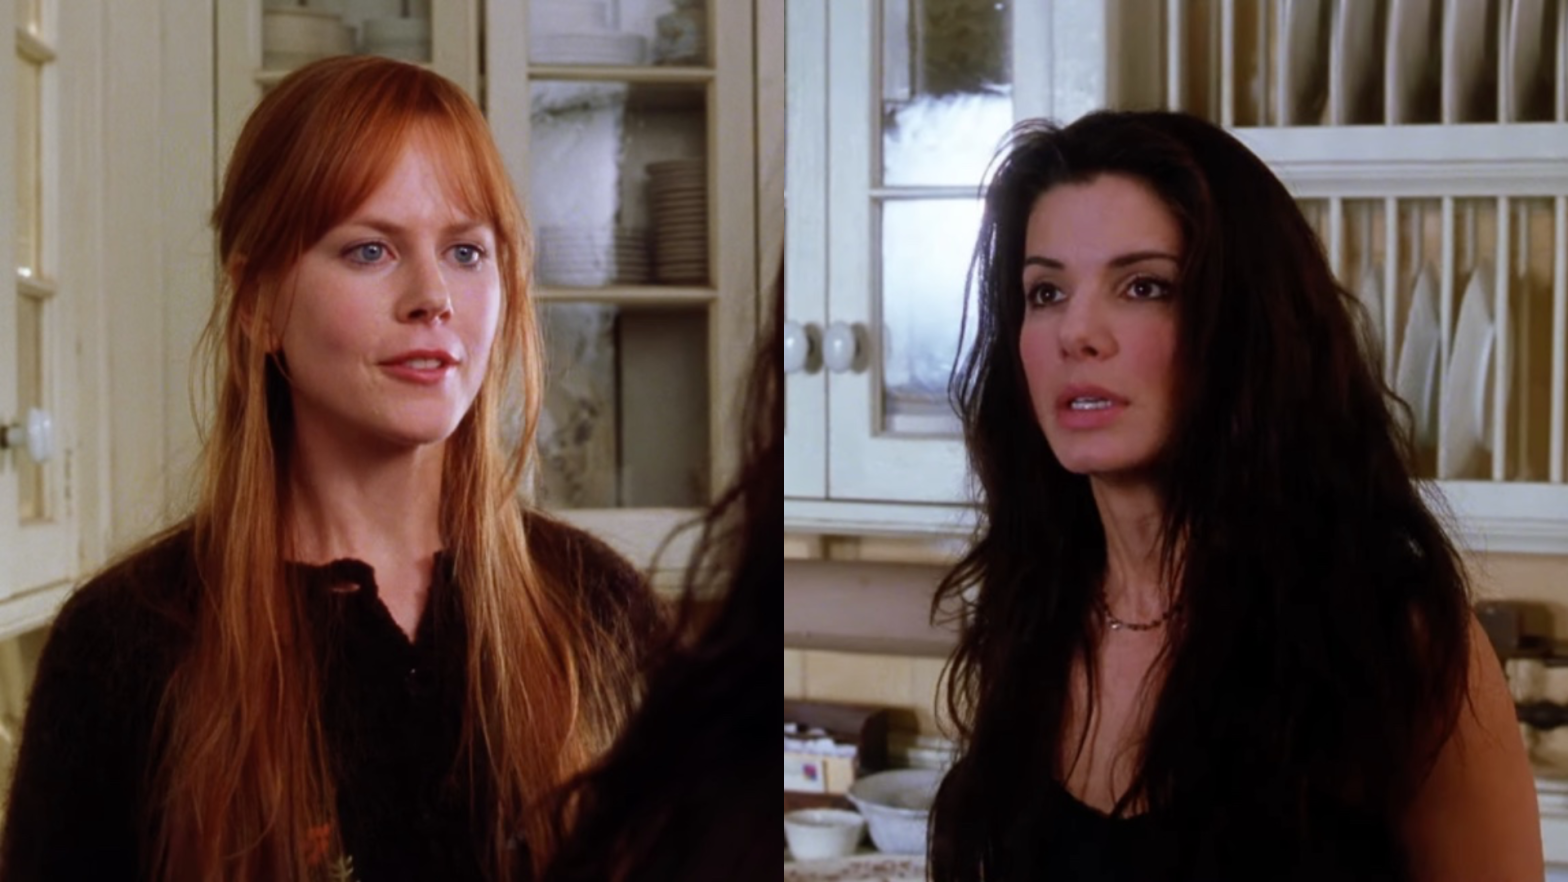 The Spell Worked: Practical Magic 2 With Sandra Bullock and Nicole Kidman May Happen